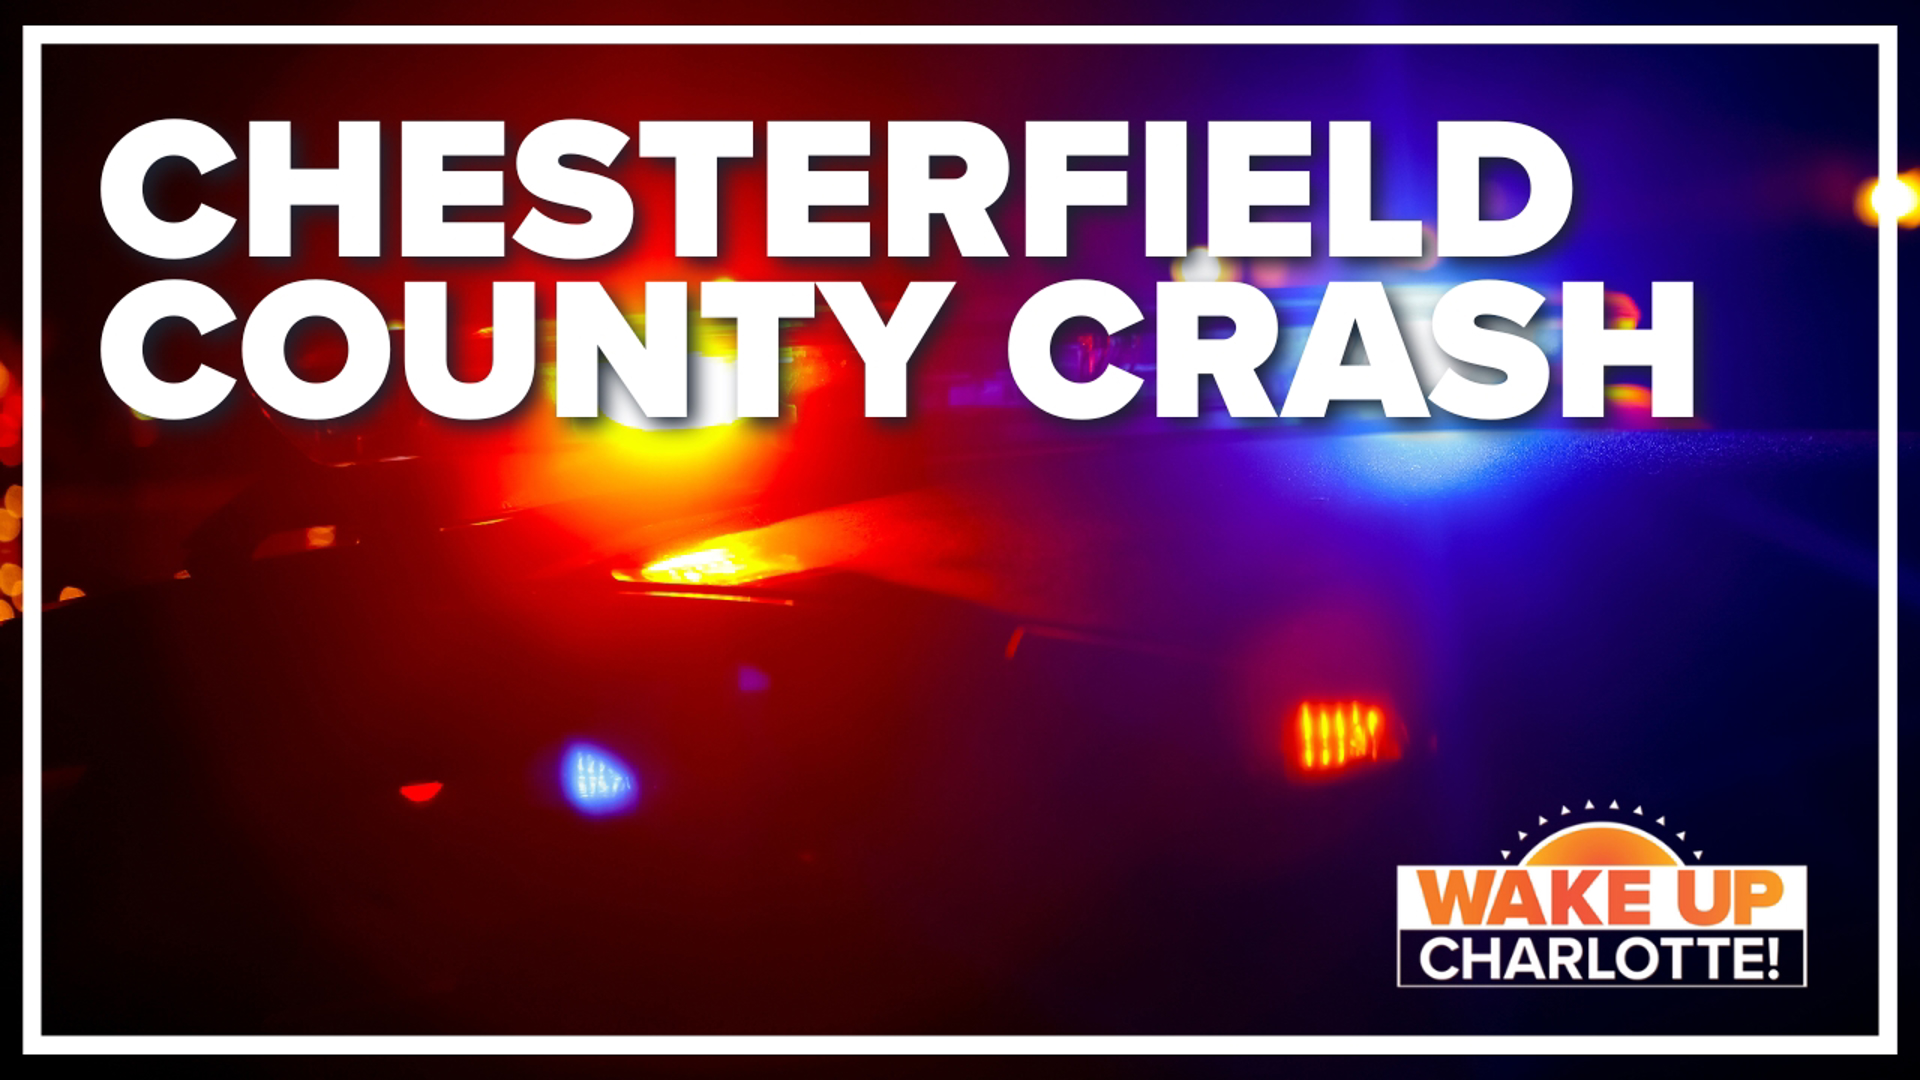 Highway Patrol is investigating a car crash in Chesterfield County that left one person dead and two people injured.